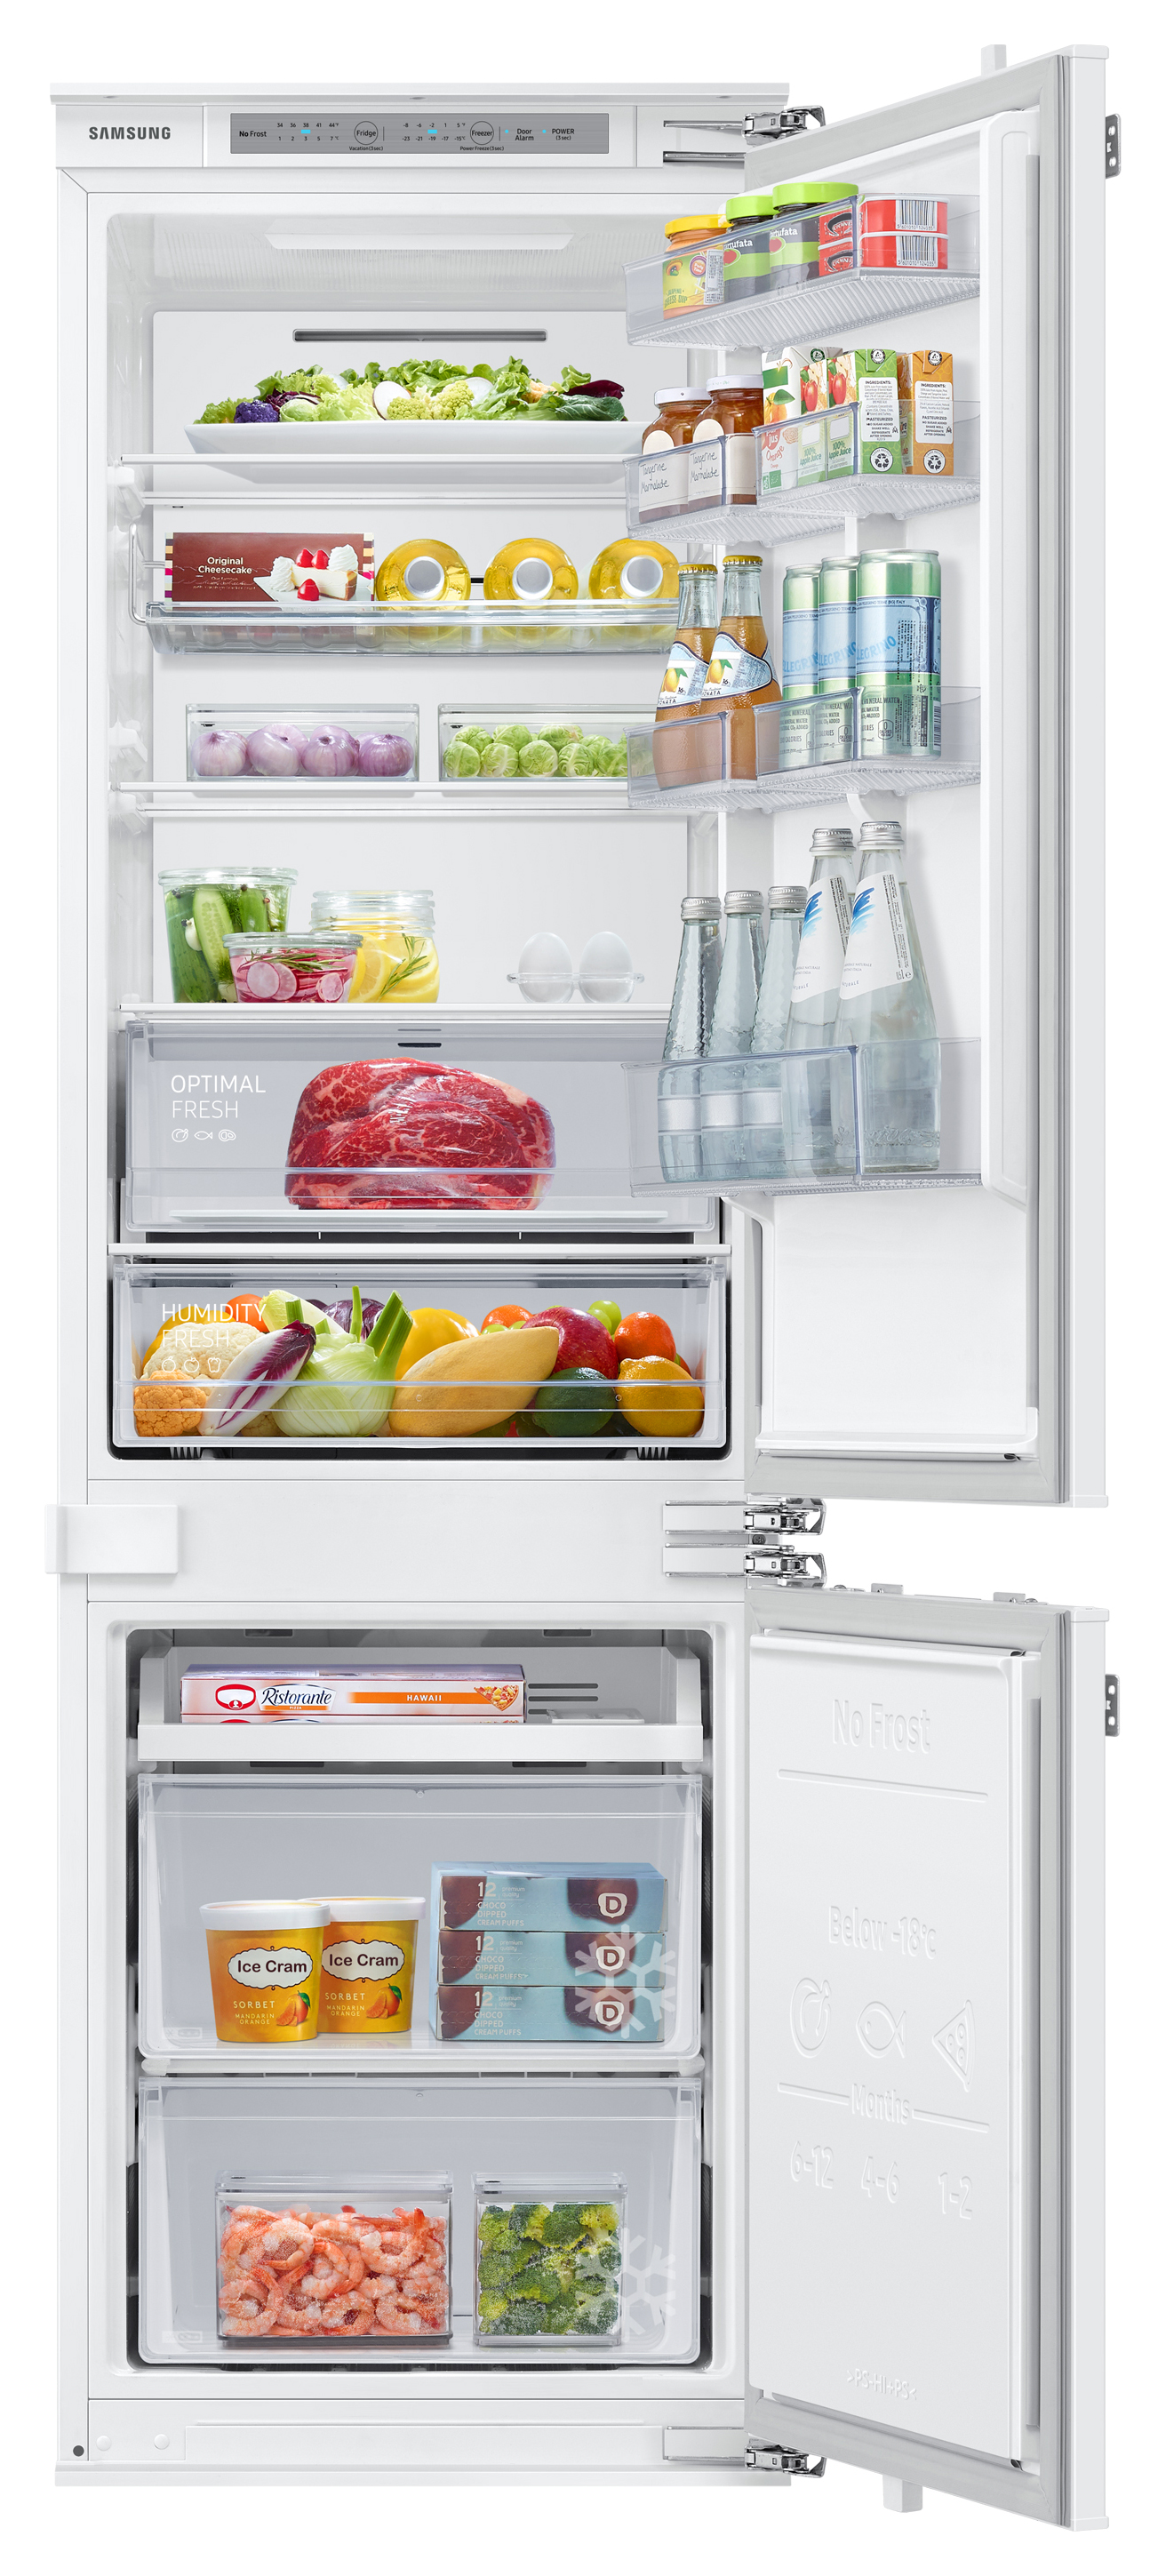 Samsung BRB26615EWW/EU Built In Fridge Freezer with SpaceMax Technology - White